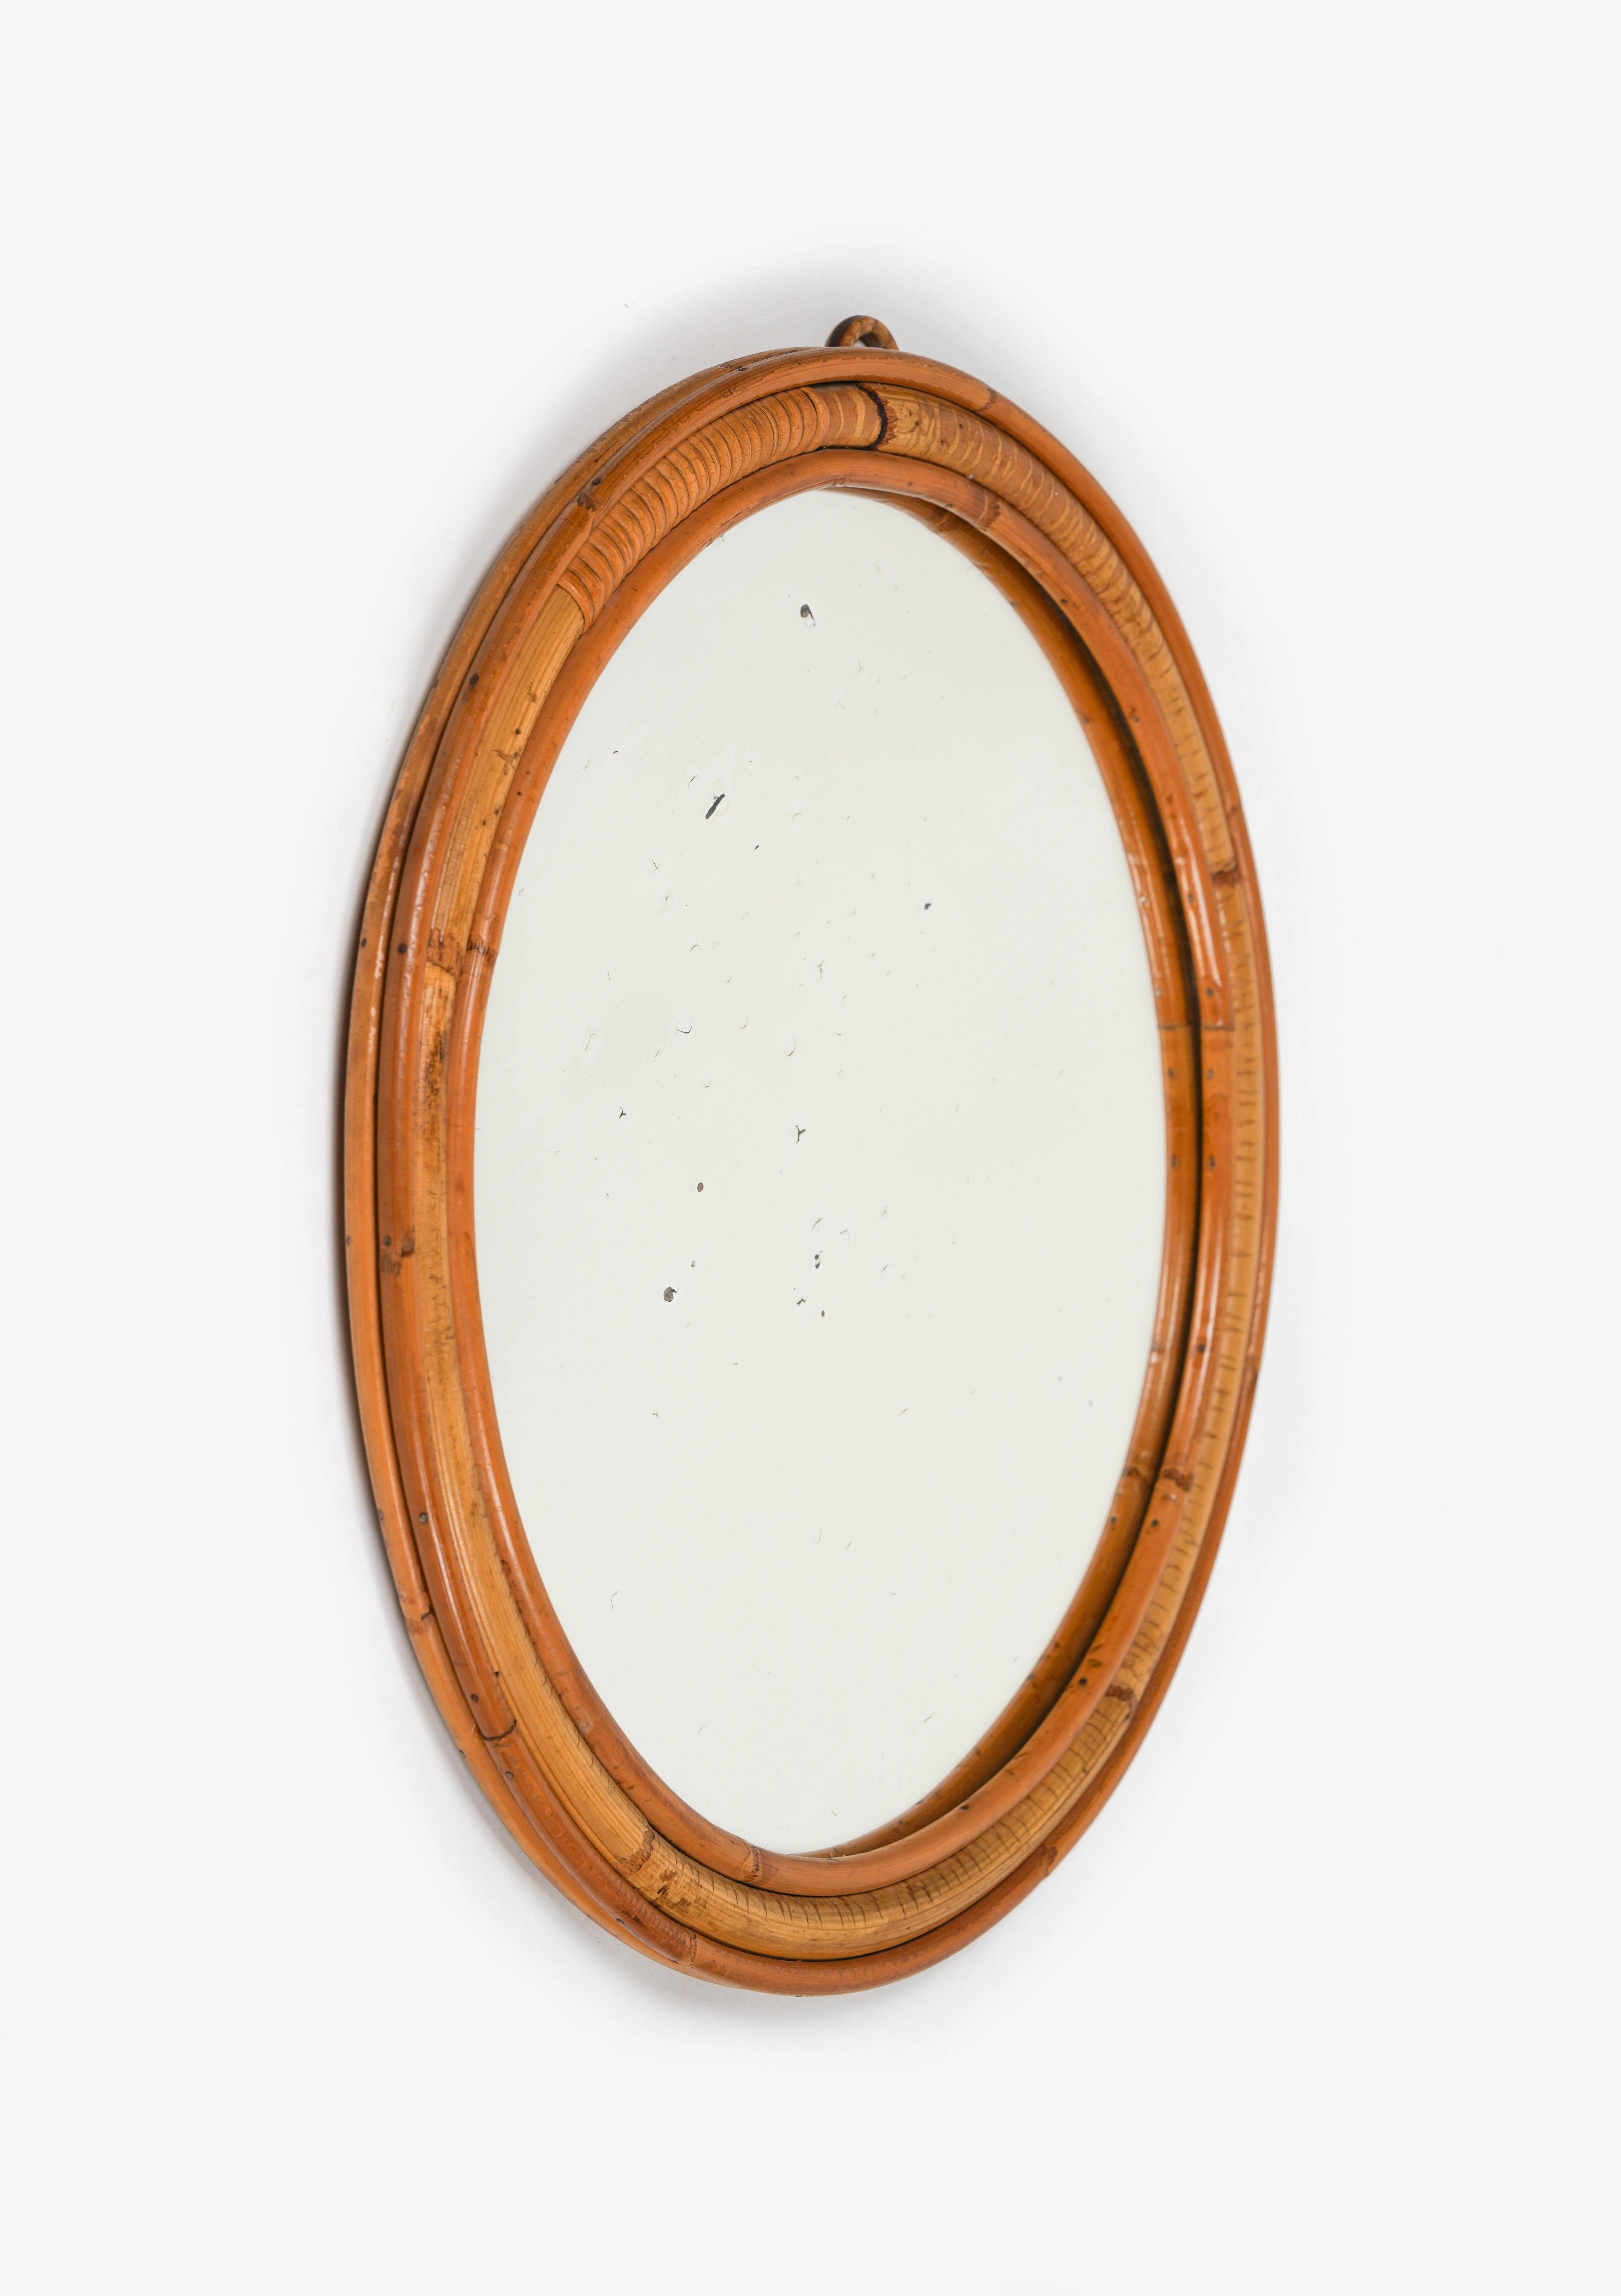 Midcentury Rattan and Bamboo Round Wall Mirror, Italy 1960s For Sale 2